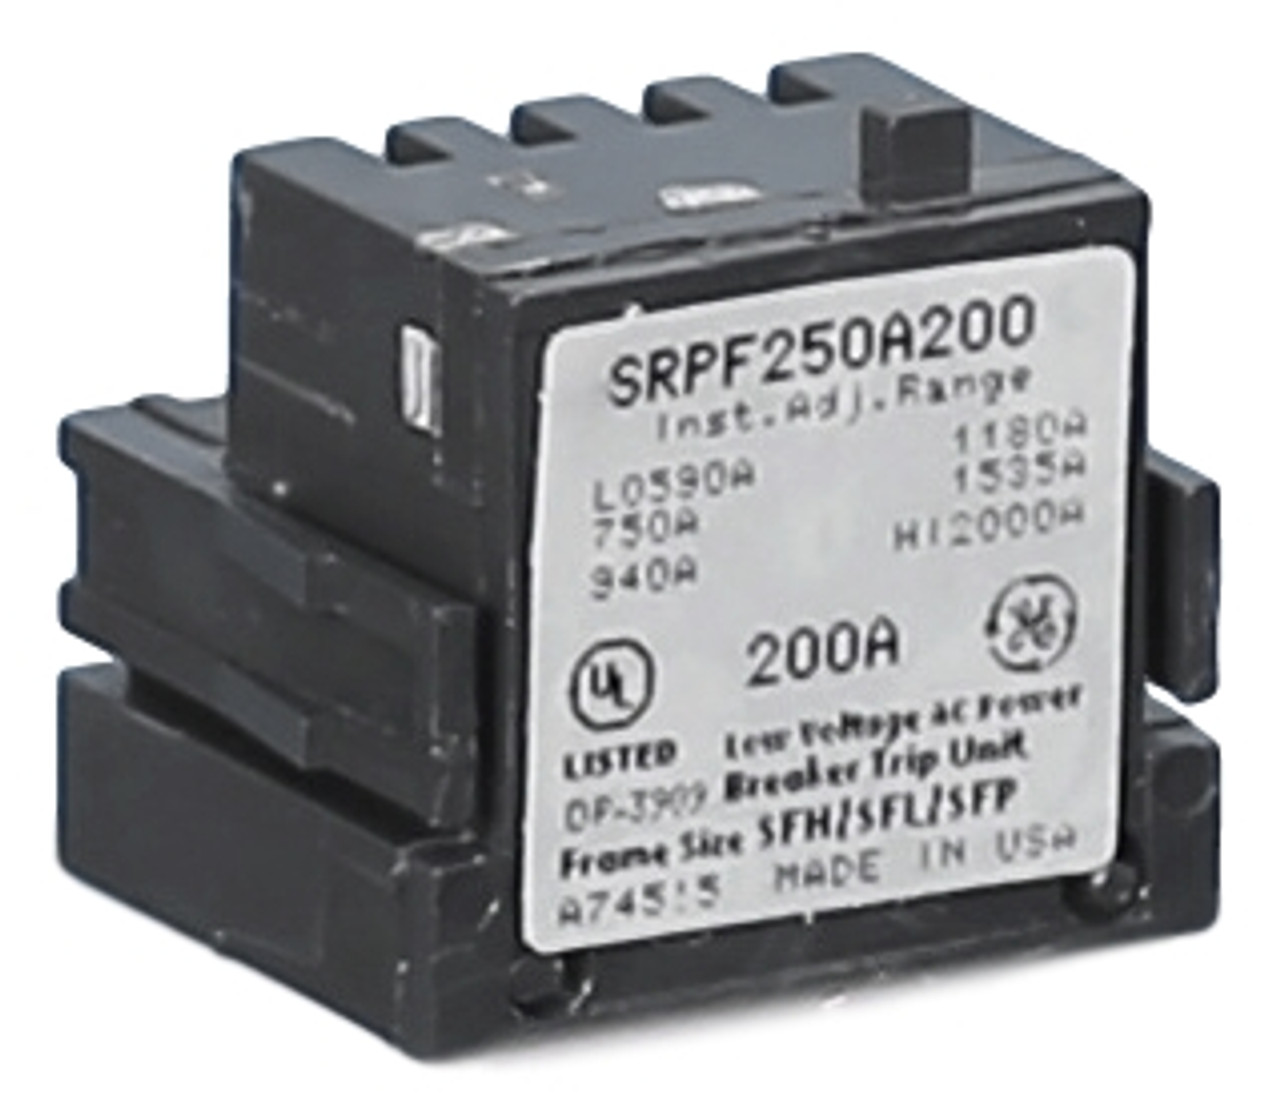 SRPF250A175
175 Amp
(Picture shown is typical for all amps)